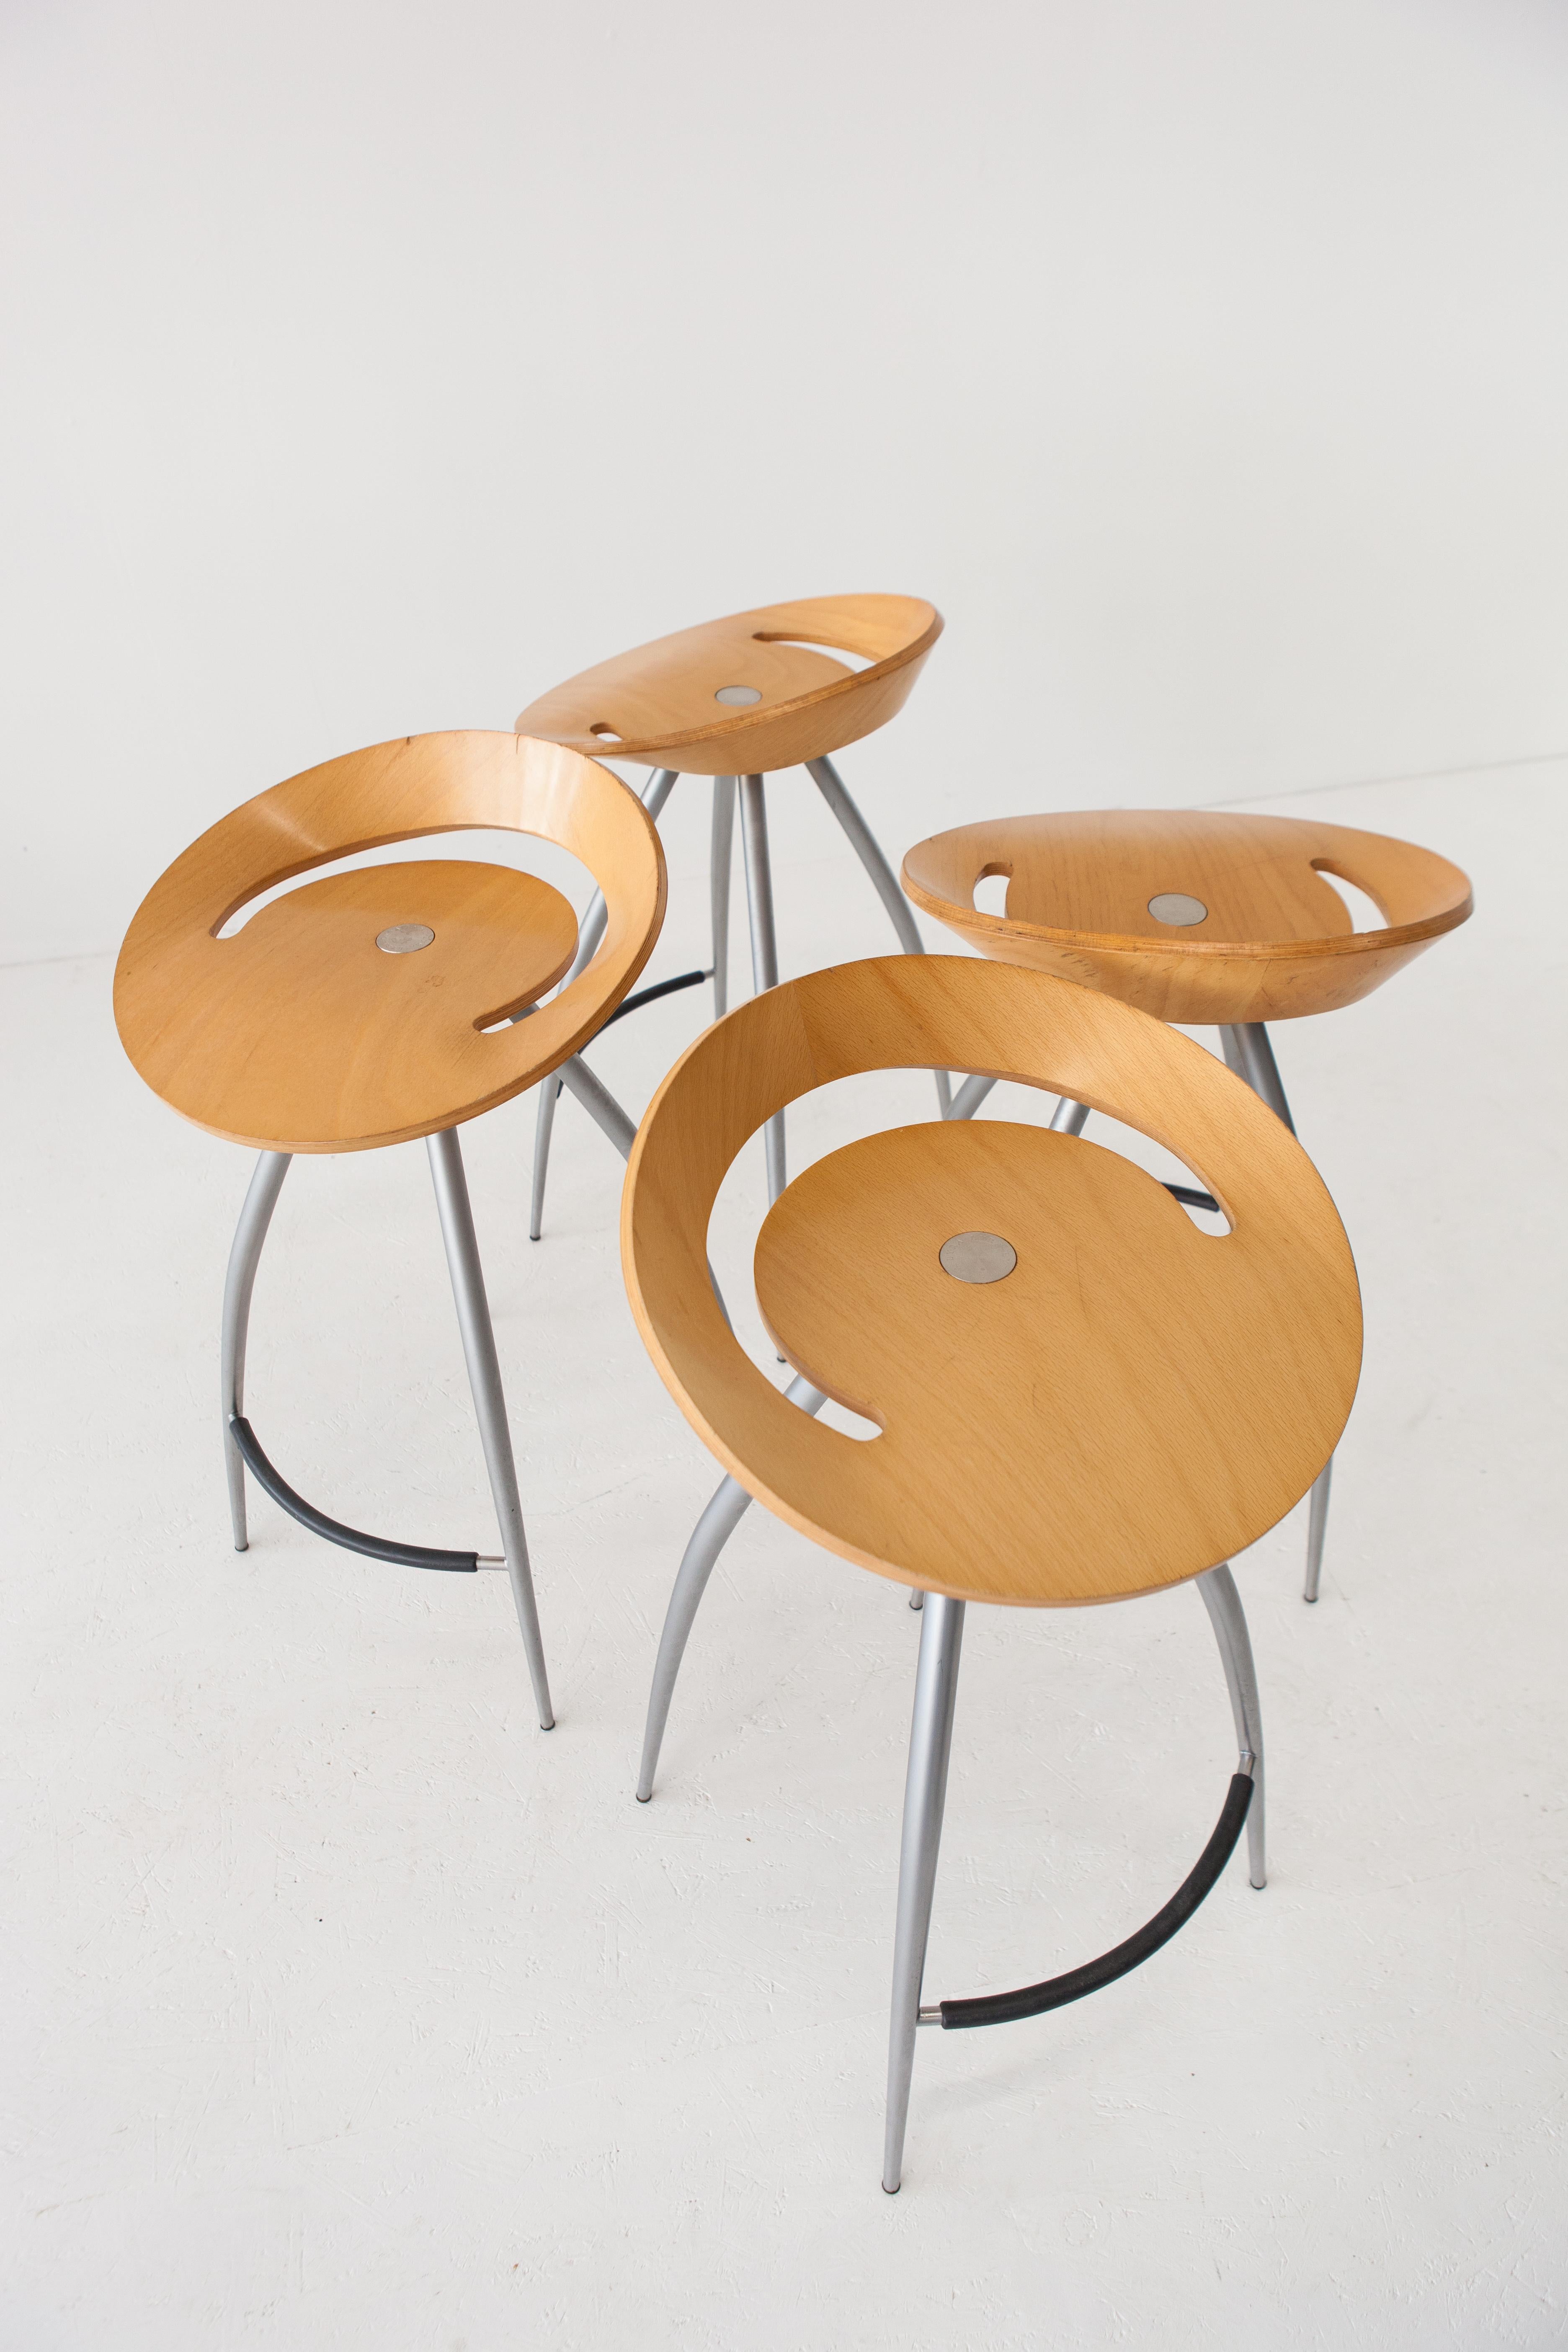 In need of some spice in your bar, restaurant or your own fancy kitchen? Designed in the 1990s by Design Group Italia for Magis, these four Italian bar stools present an iconic spider-like silhouette. The warm-colored bentwood not only contributes